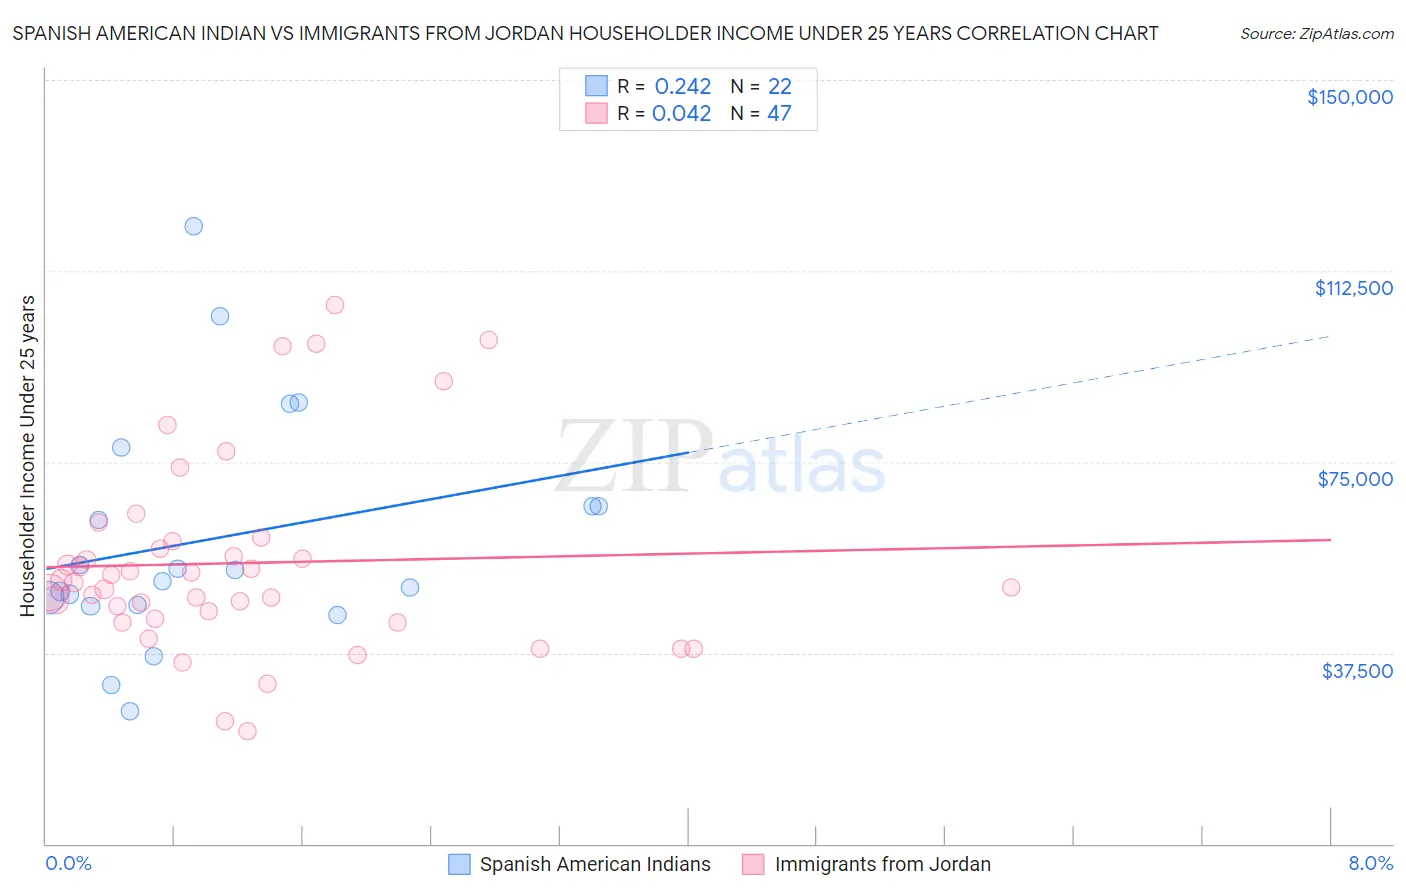 Spanish American Indian vs Immigrants from Jordan Householder Income Under 25 years